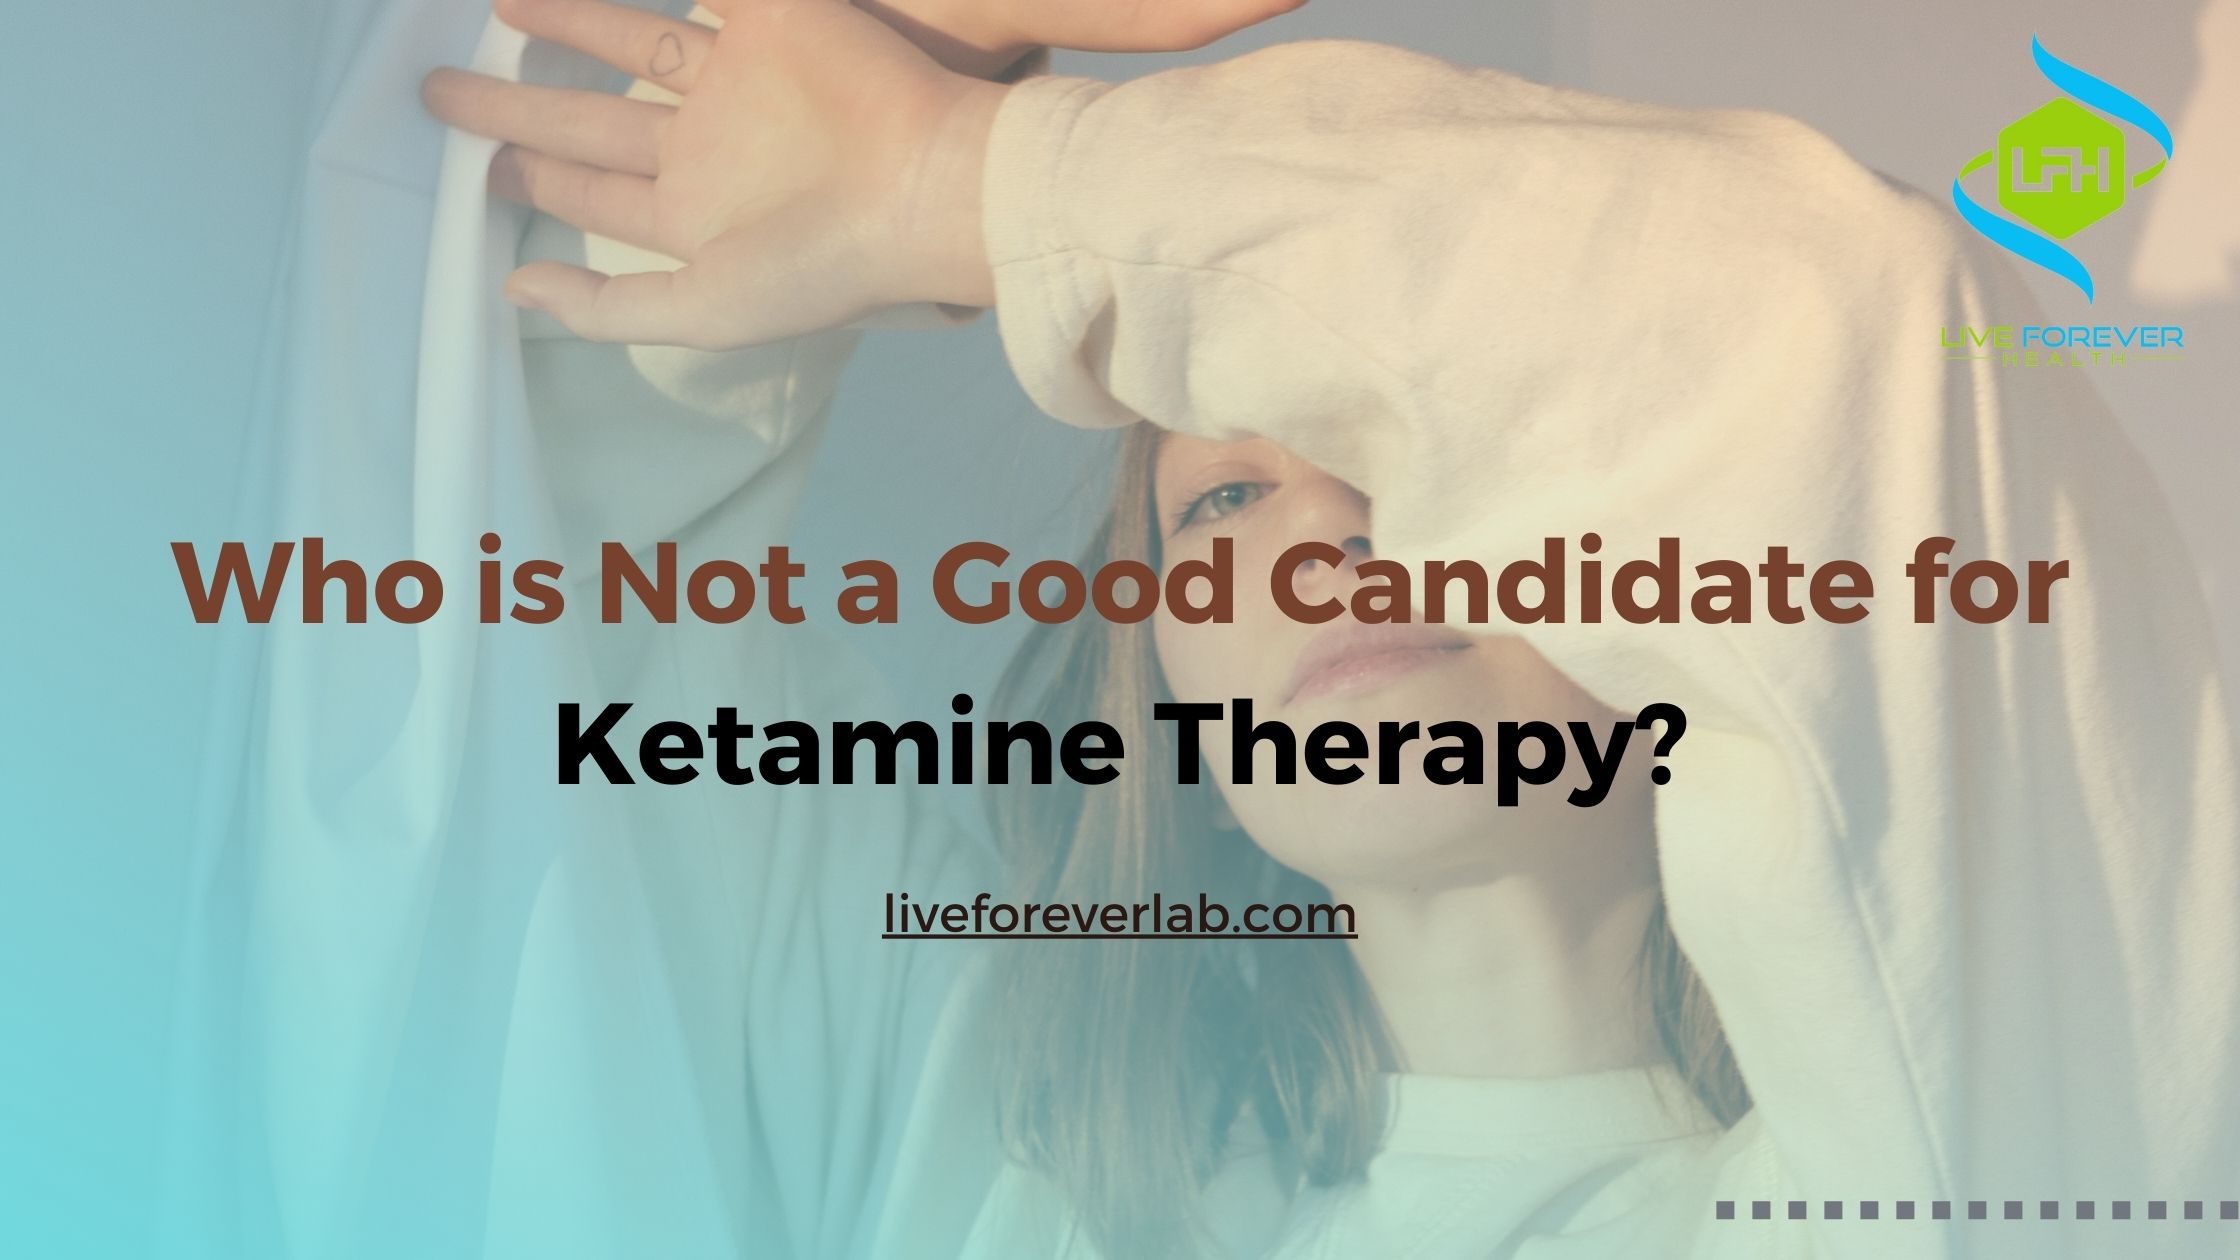 Who is Not a Good Candidate for Ketamine Therapy?